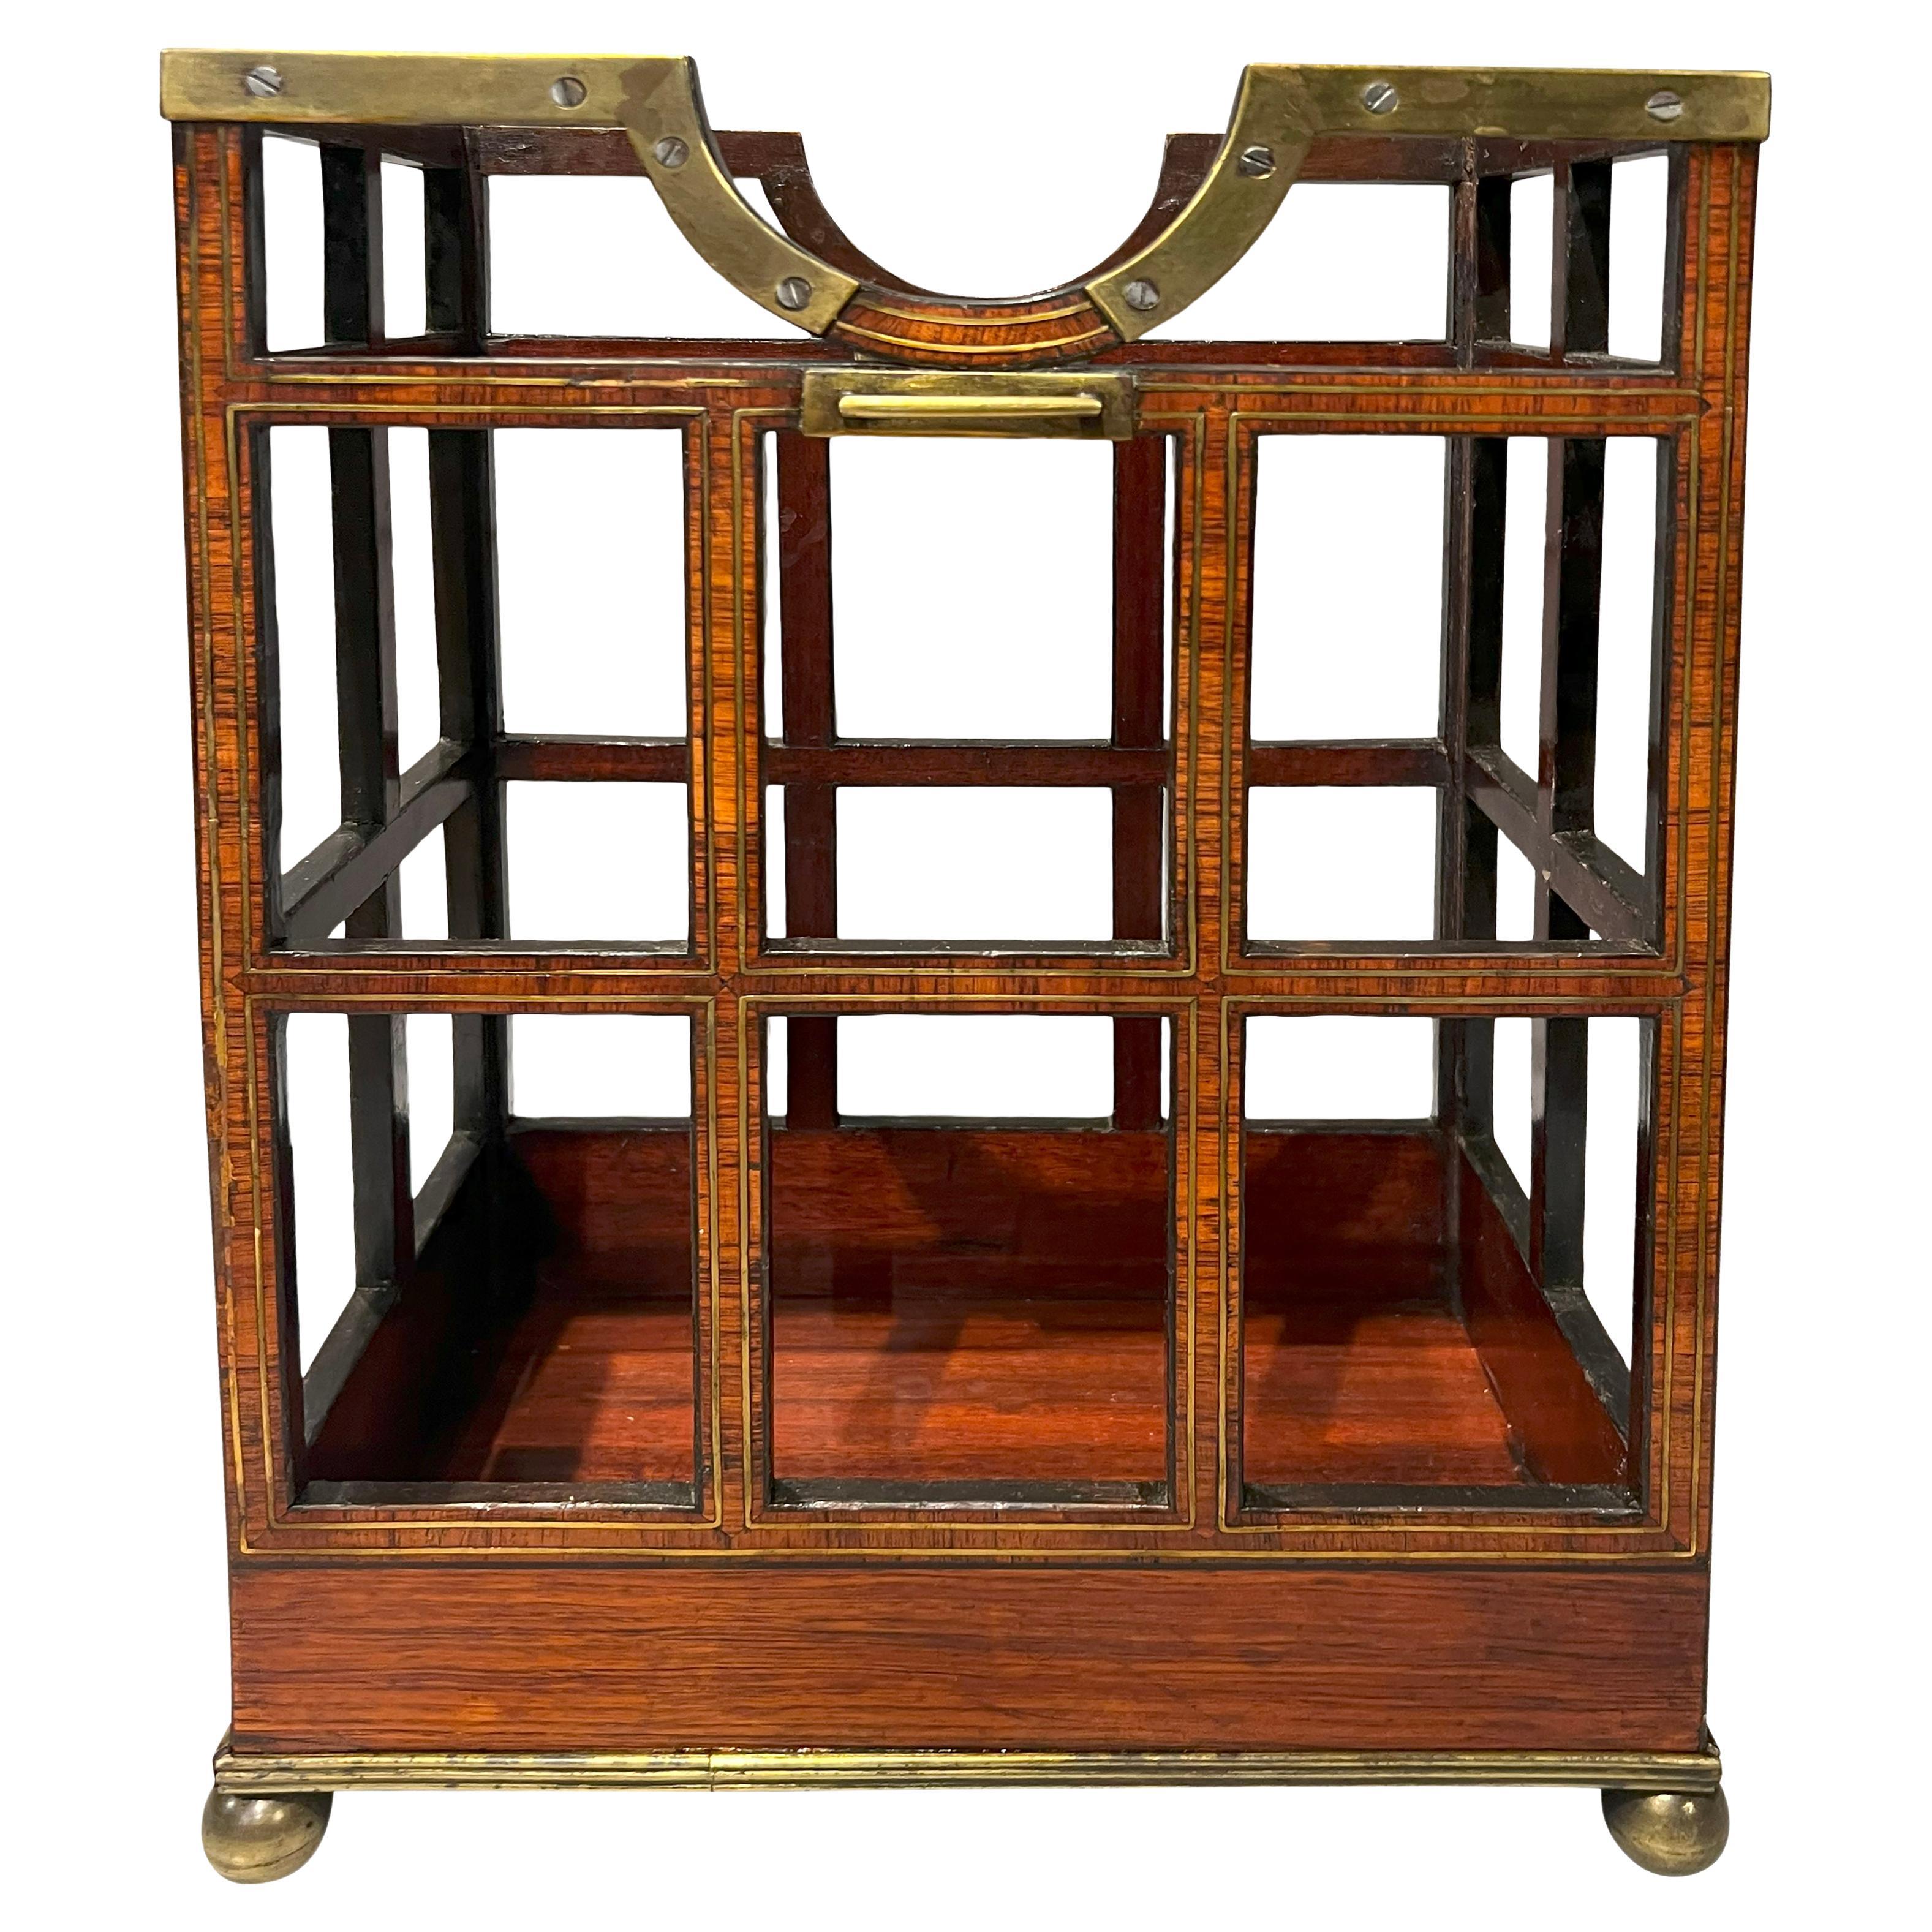 Unusual Regency Rosewood And Brass Inlaid Bottle Caddy